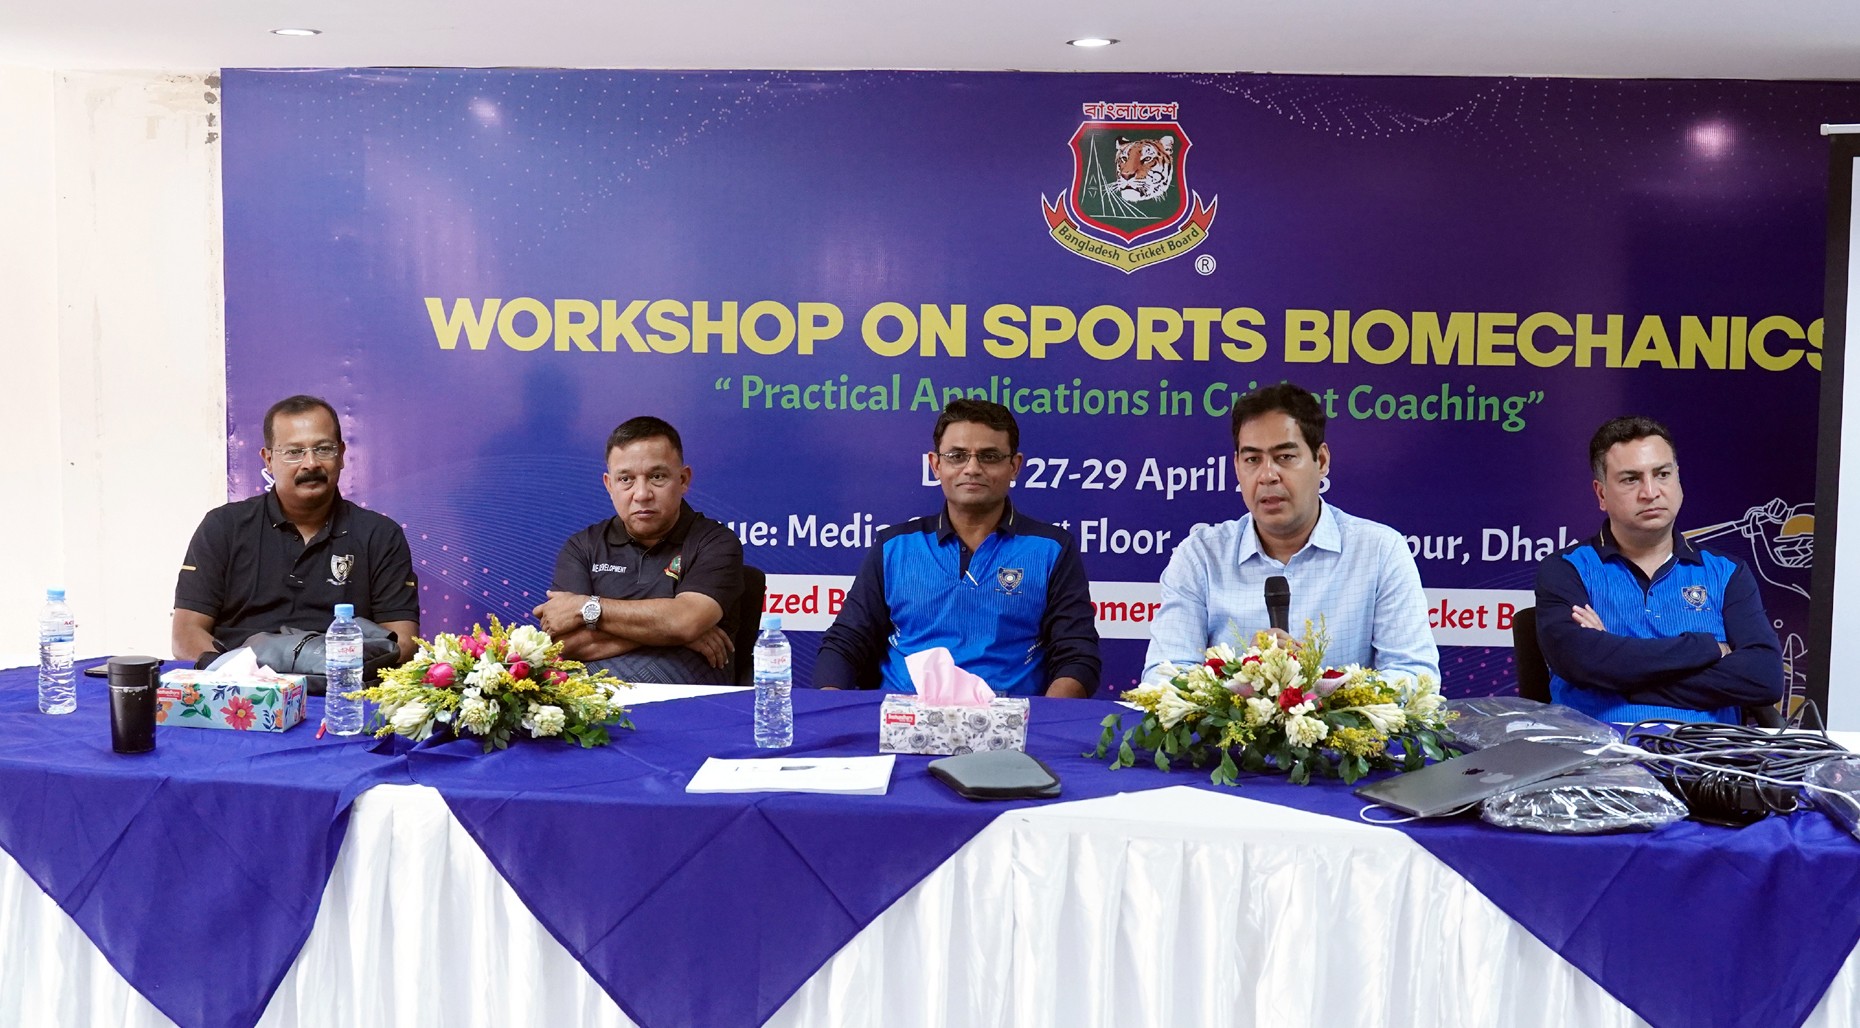 A three-day workshop on Sports Biomechanics Practical Applications in Cricket Coaching began